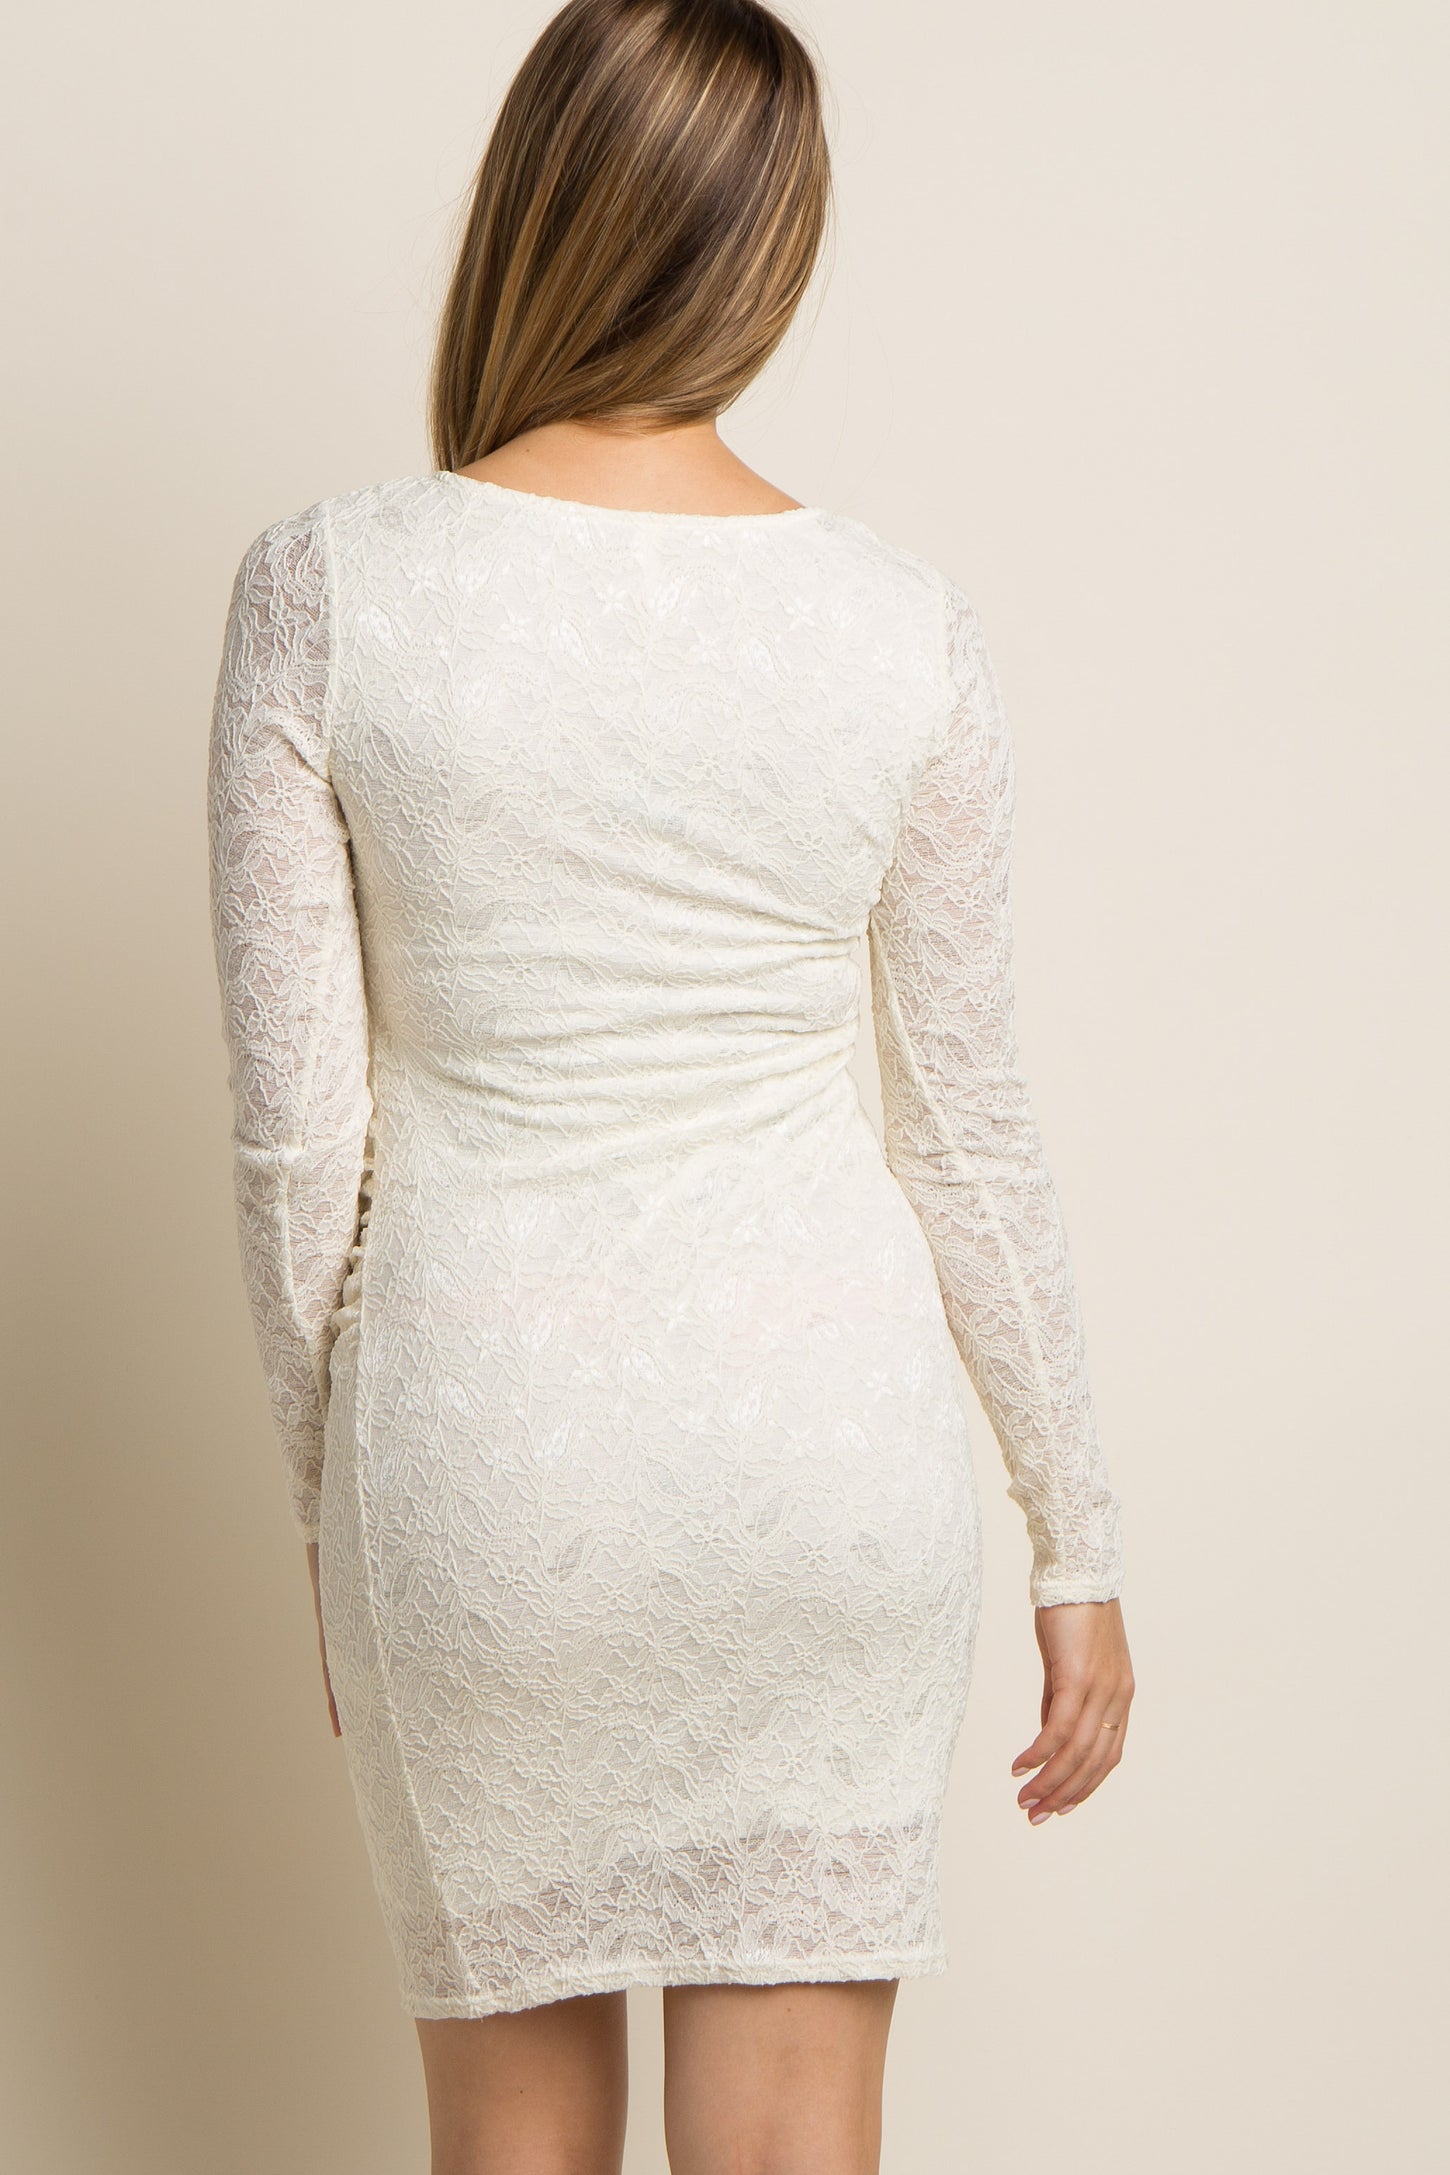 PinkBlush Ivory Lace Fitted Long Sleeve Maternity Dress